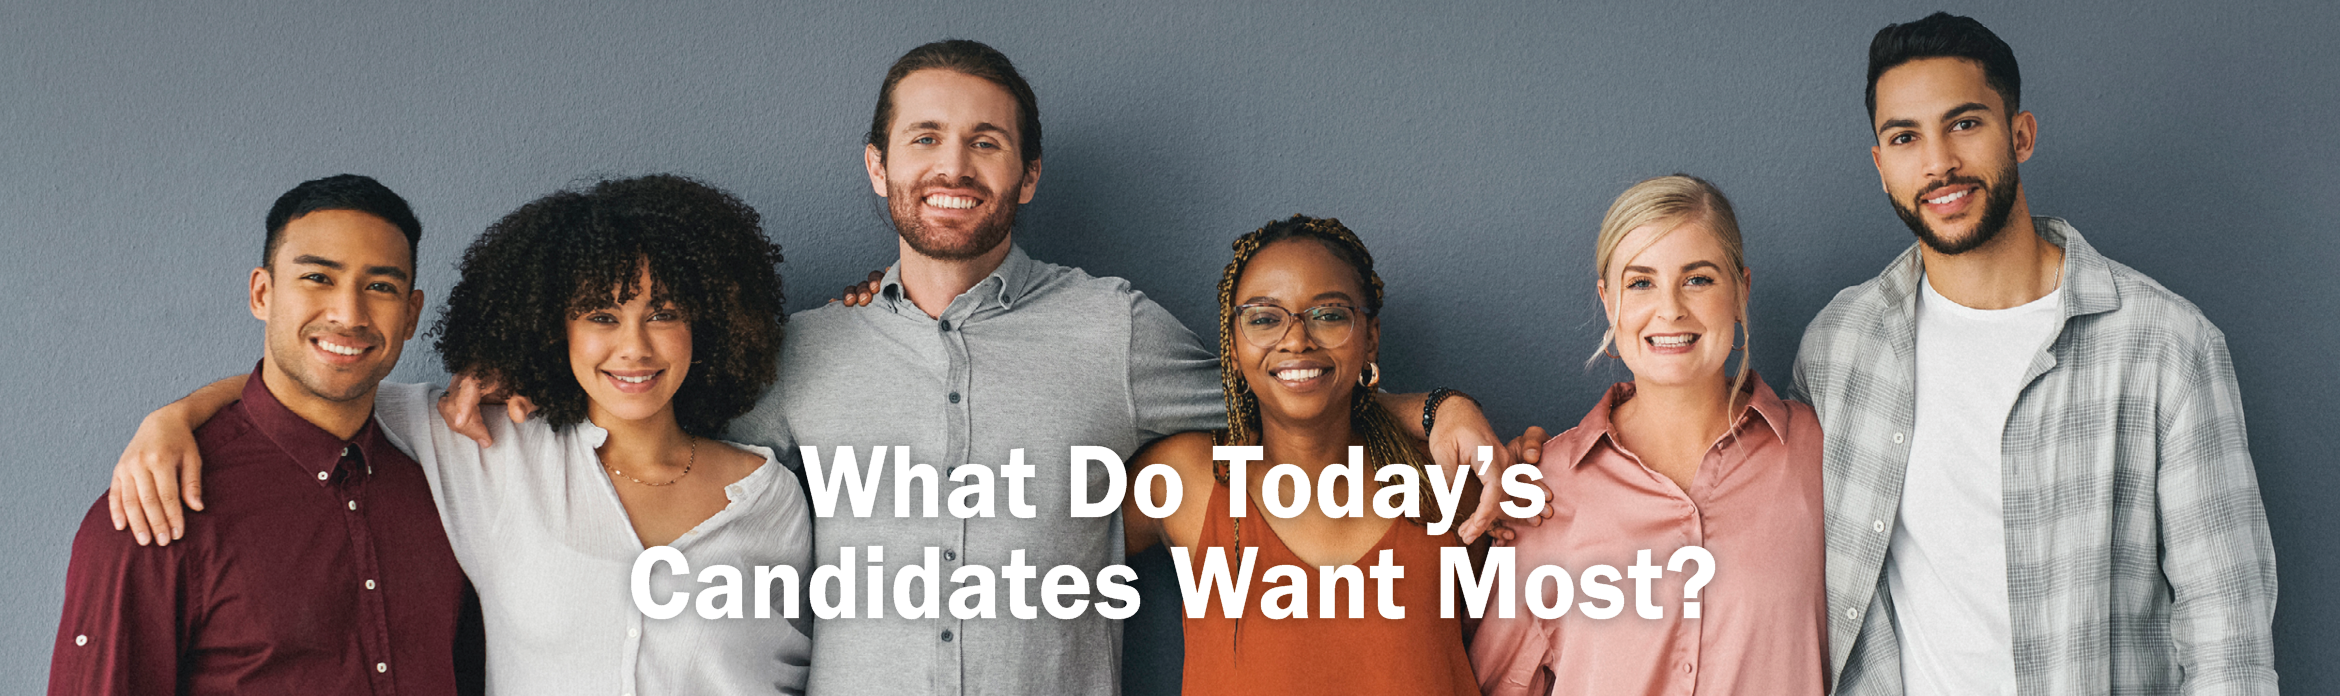 What Do Today’s Candidates Want Most?